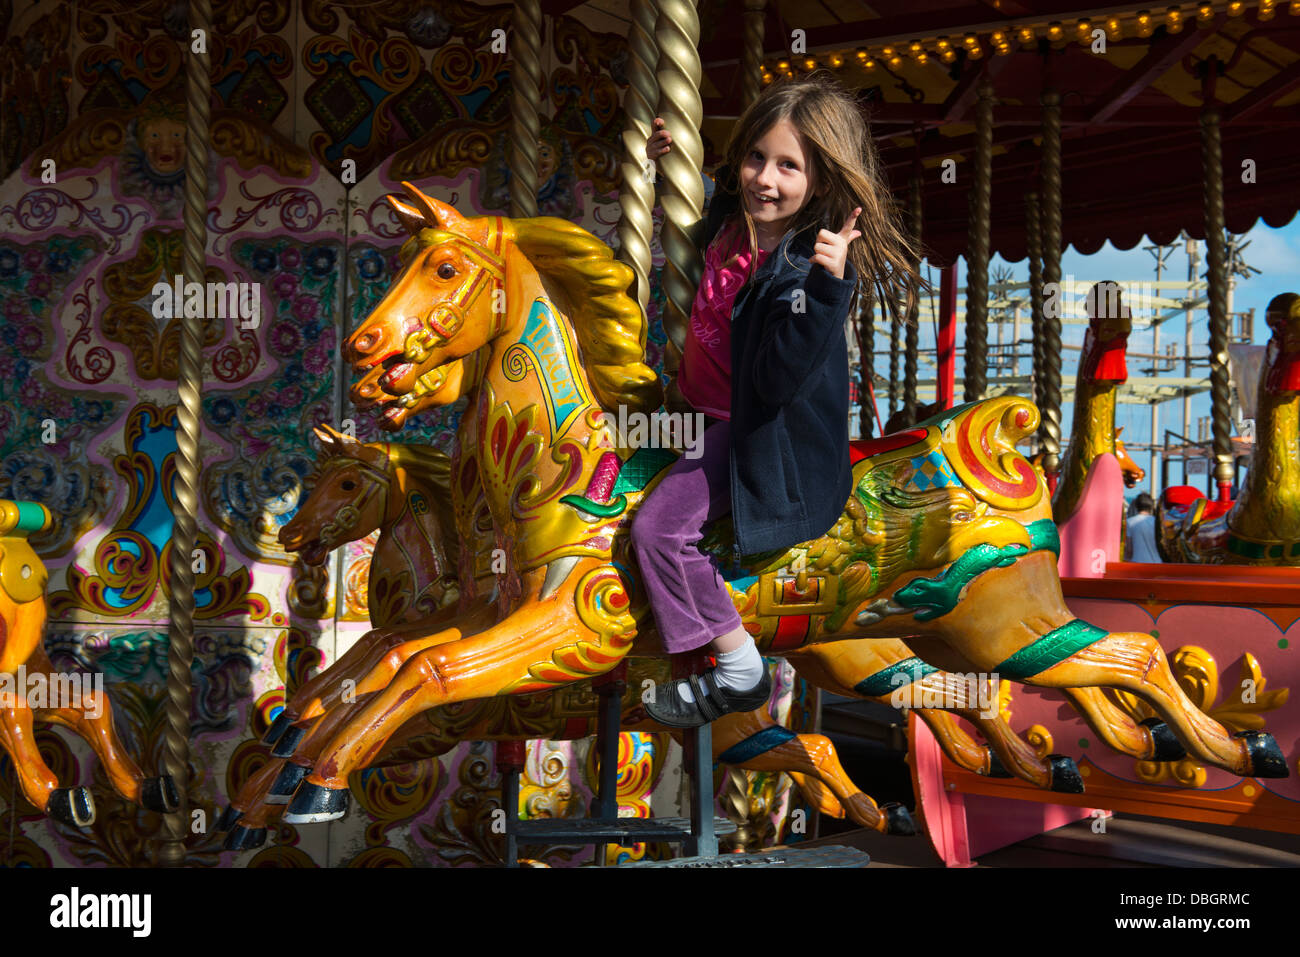 Model released image of a young girl riding on a Merry-go-Round at Portsmouth. Stock Photo